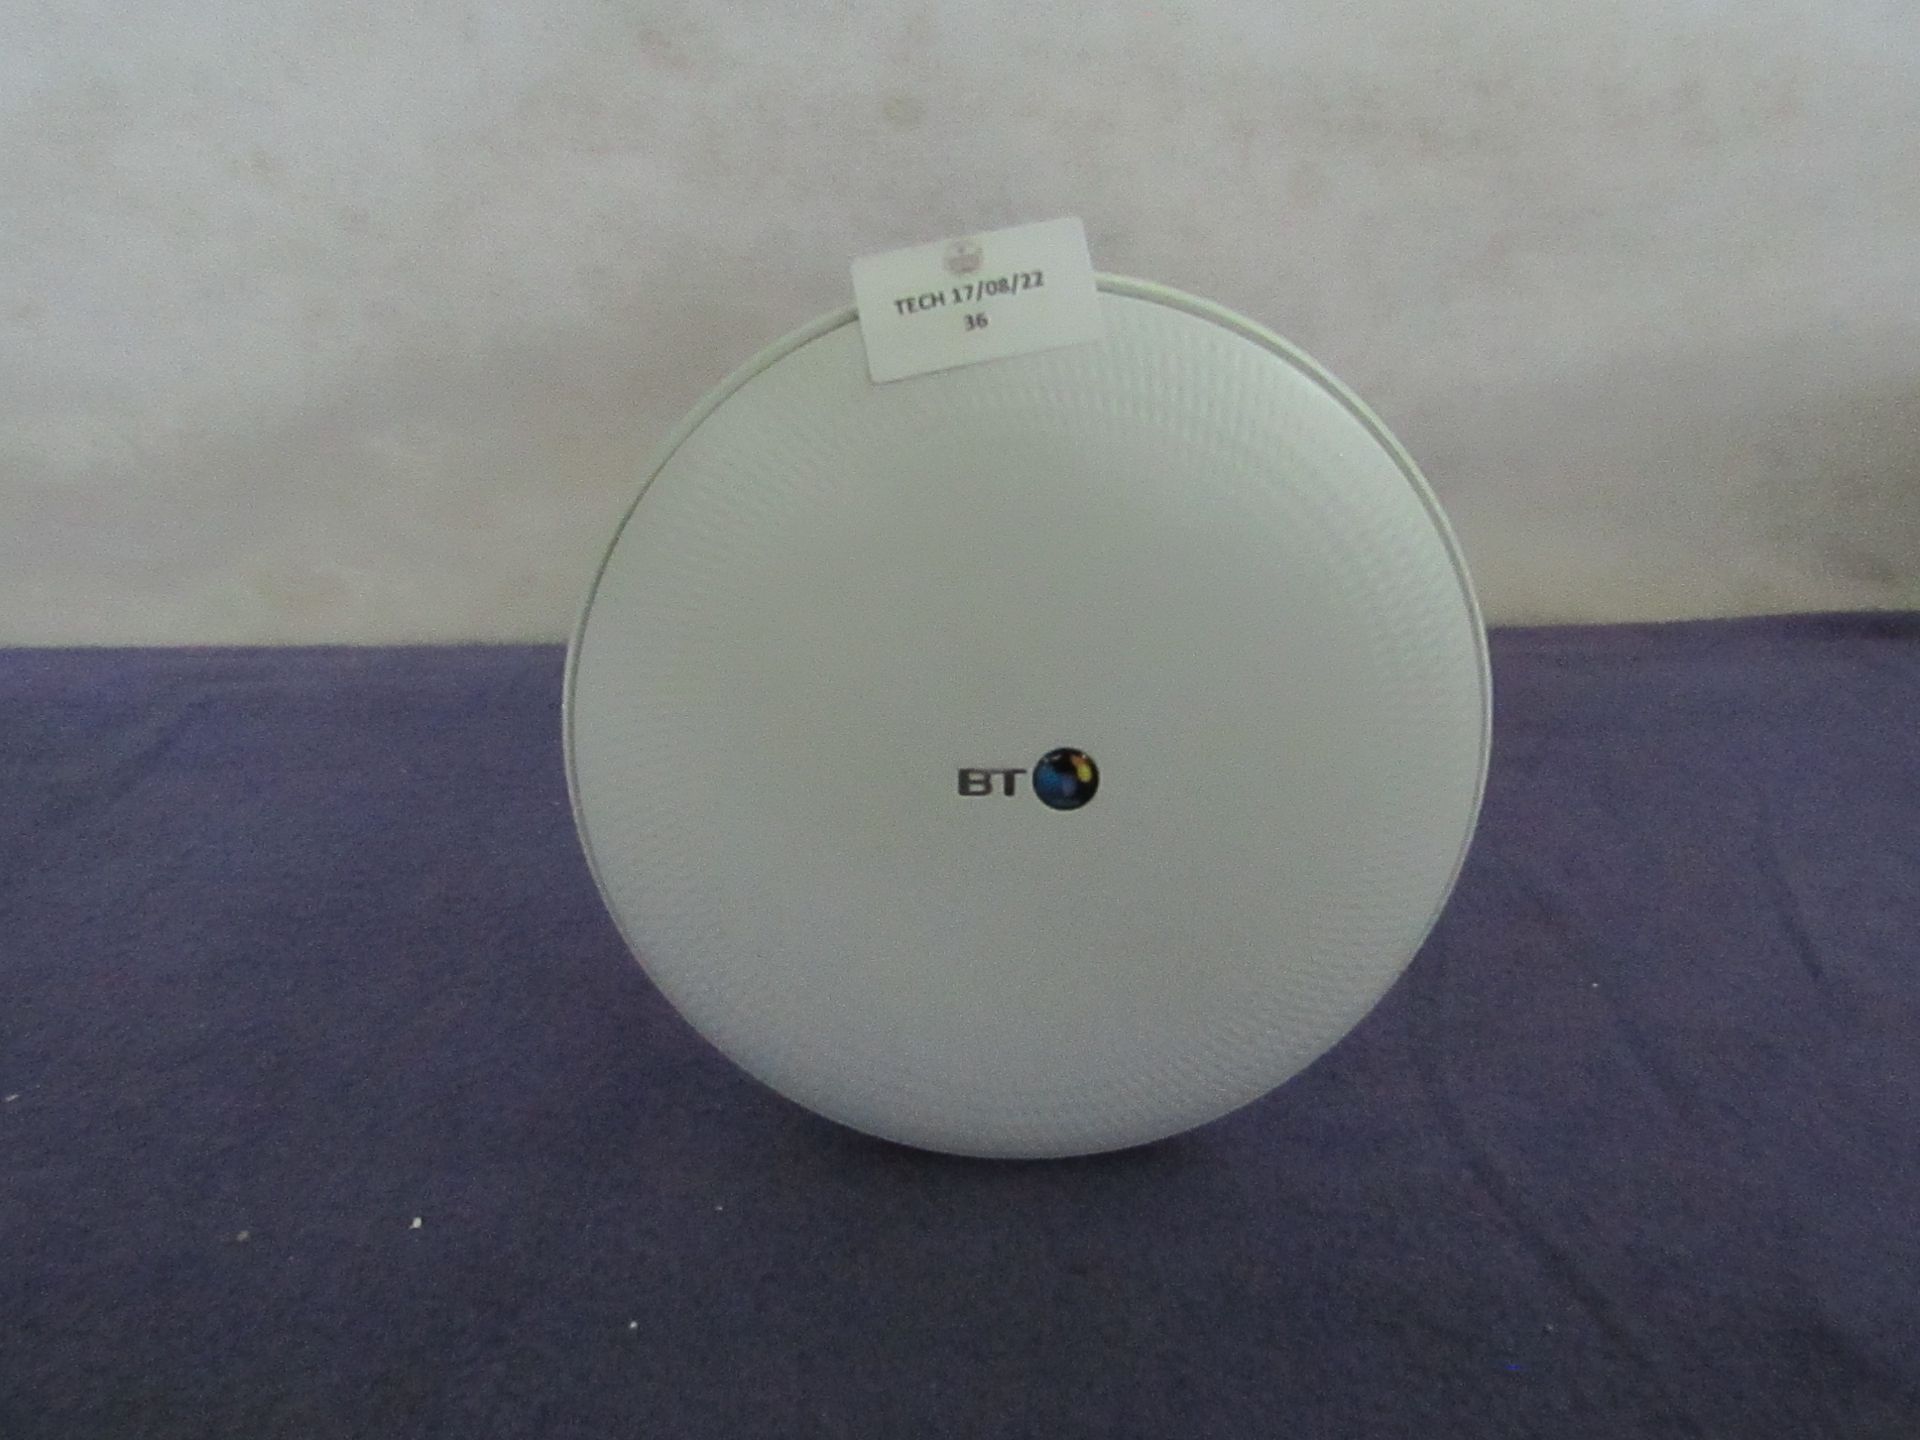 BT - Whole Home Wi-Fi Booster Disc - White - Untested, No Packaging.